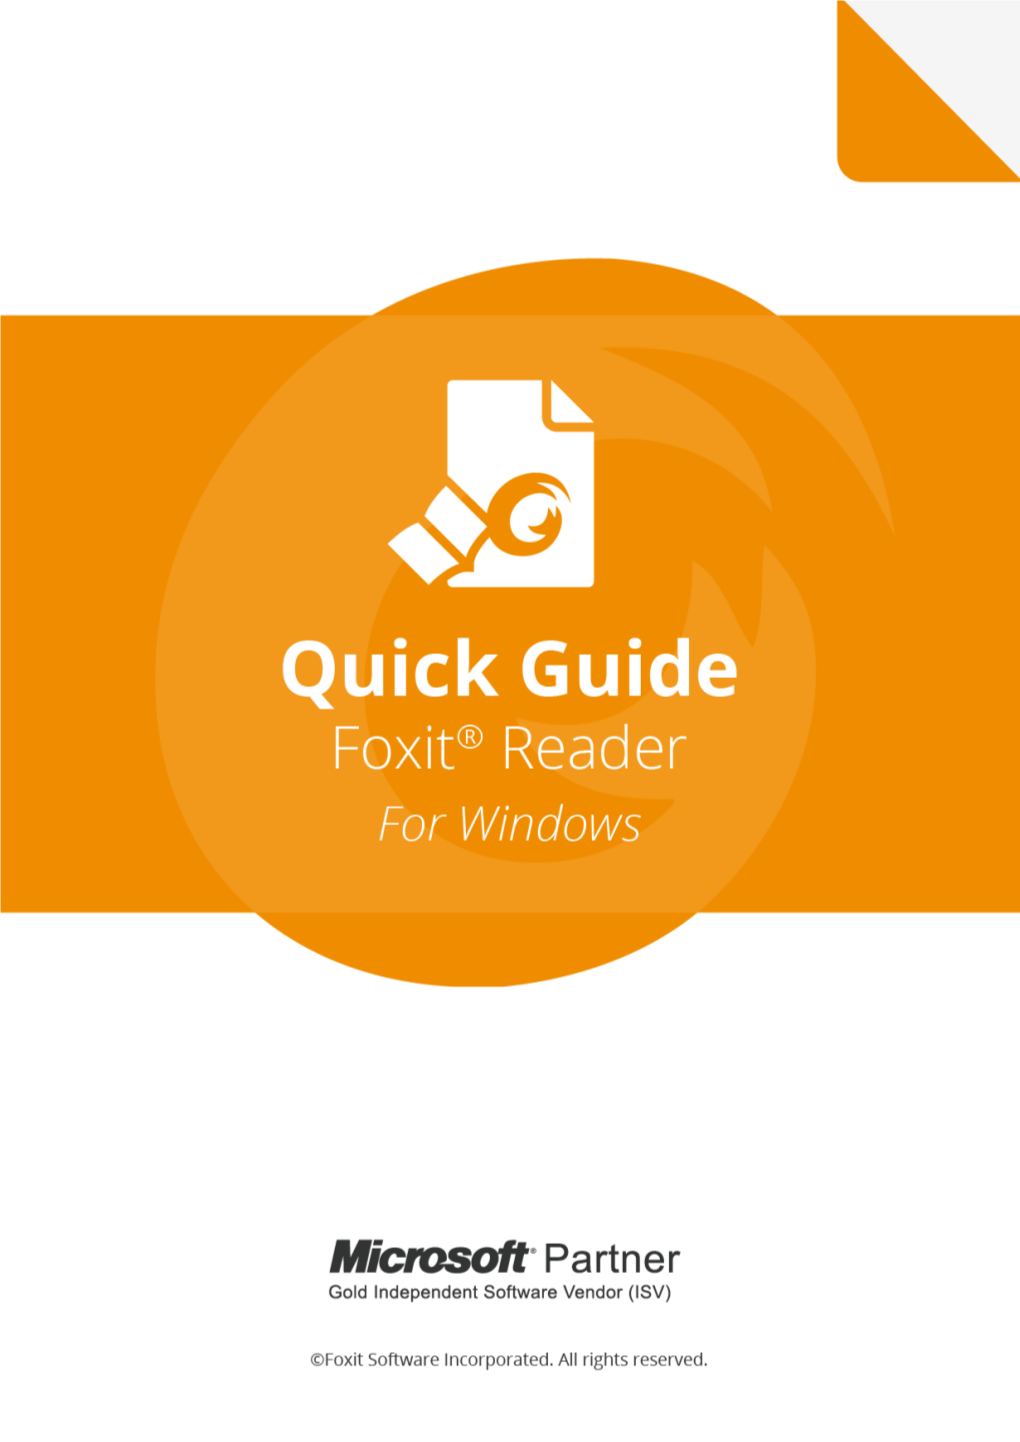 Foxit Reader 10.0 Quick Guide